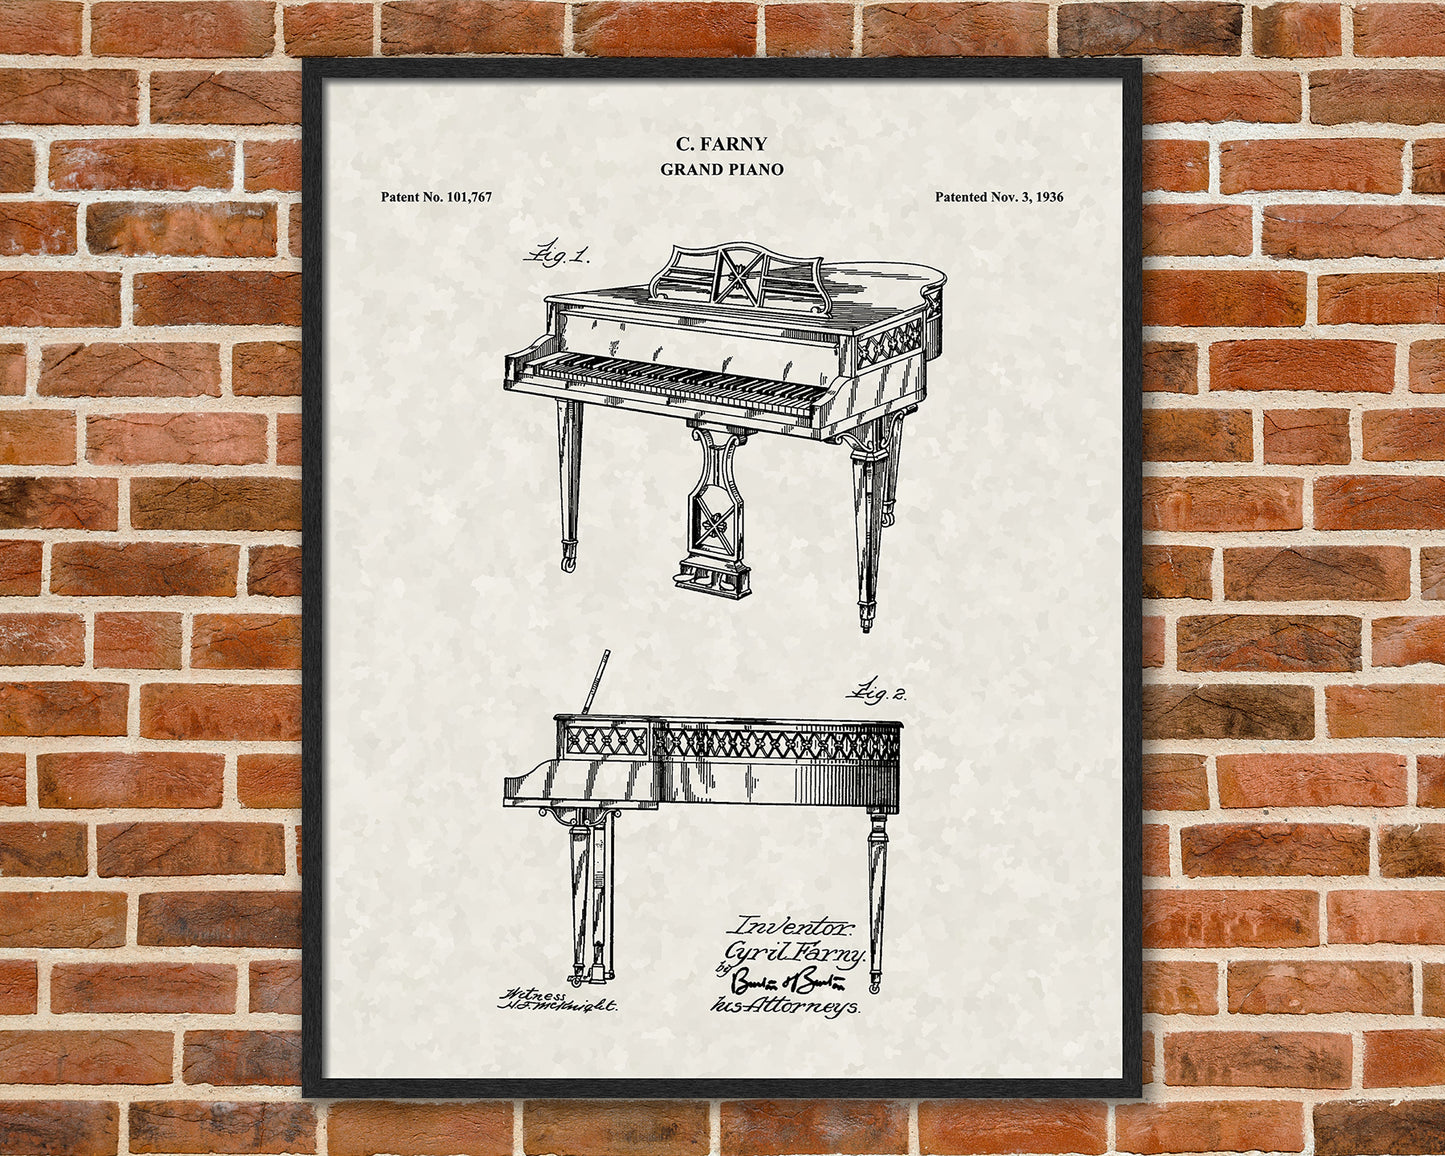 Grand Piano Patent Drawings, Wall Art Poster - Great Vintage Room Decor - Art Prints - Unique Gift for Musician\Music Enthusiast 03012